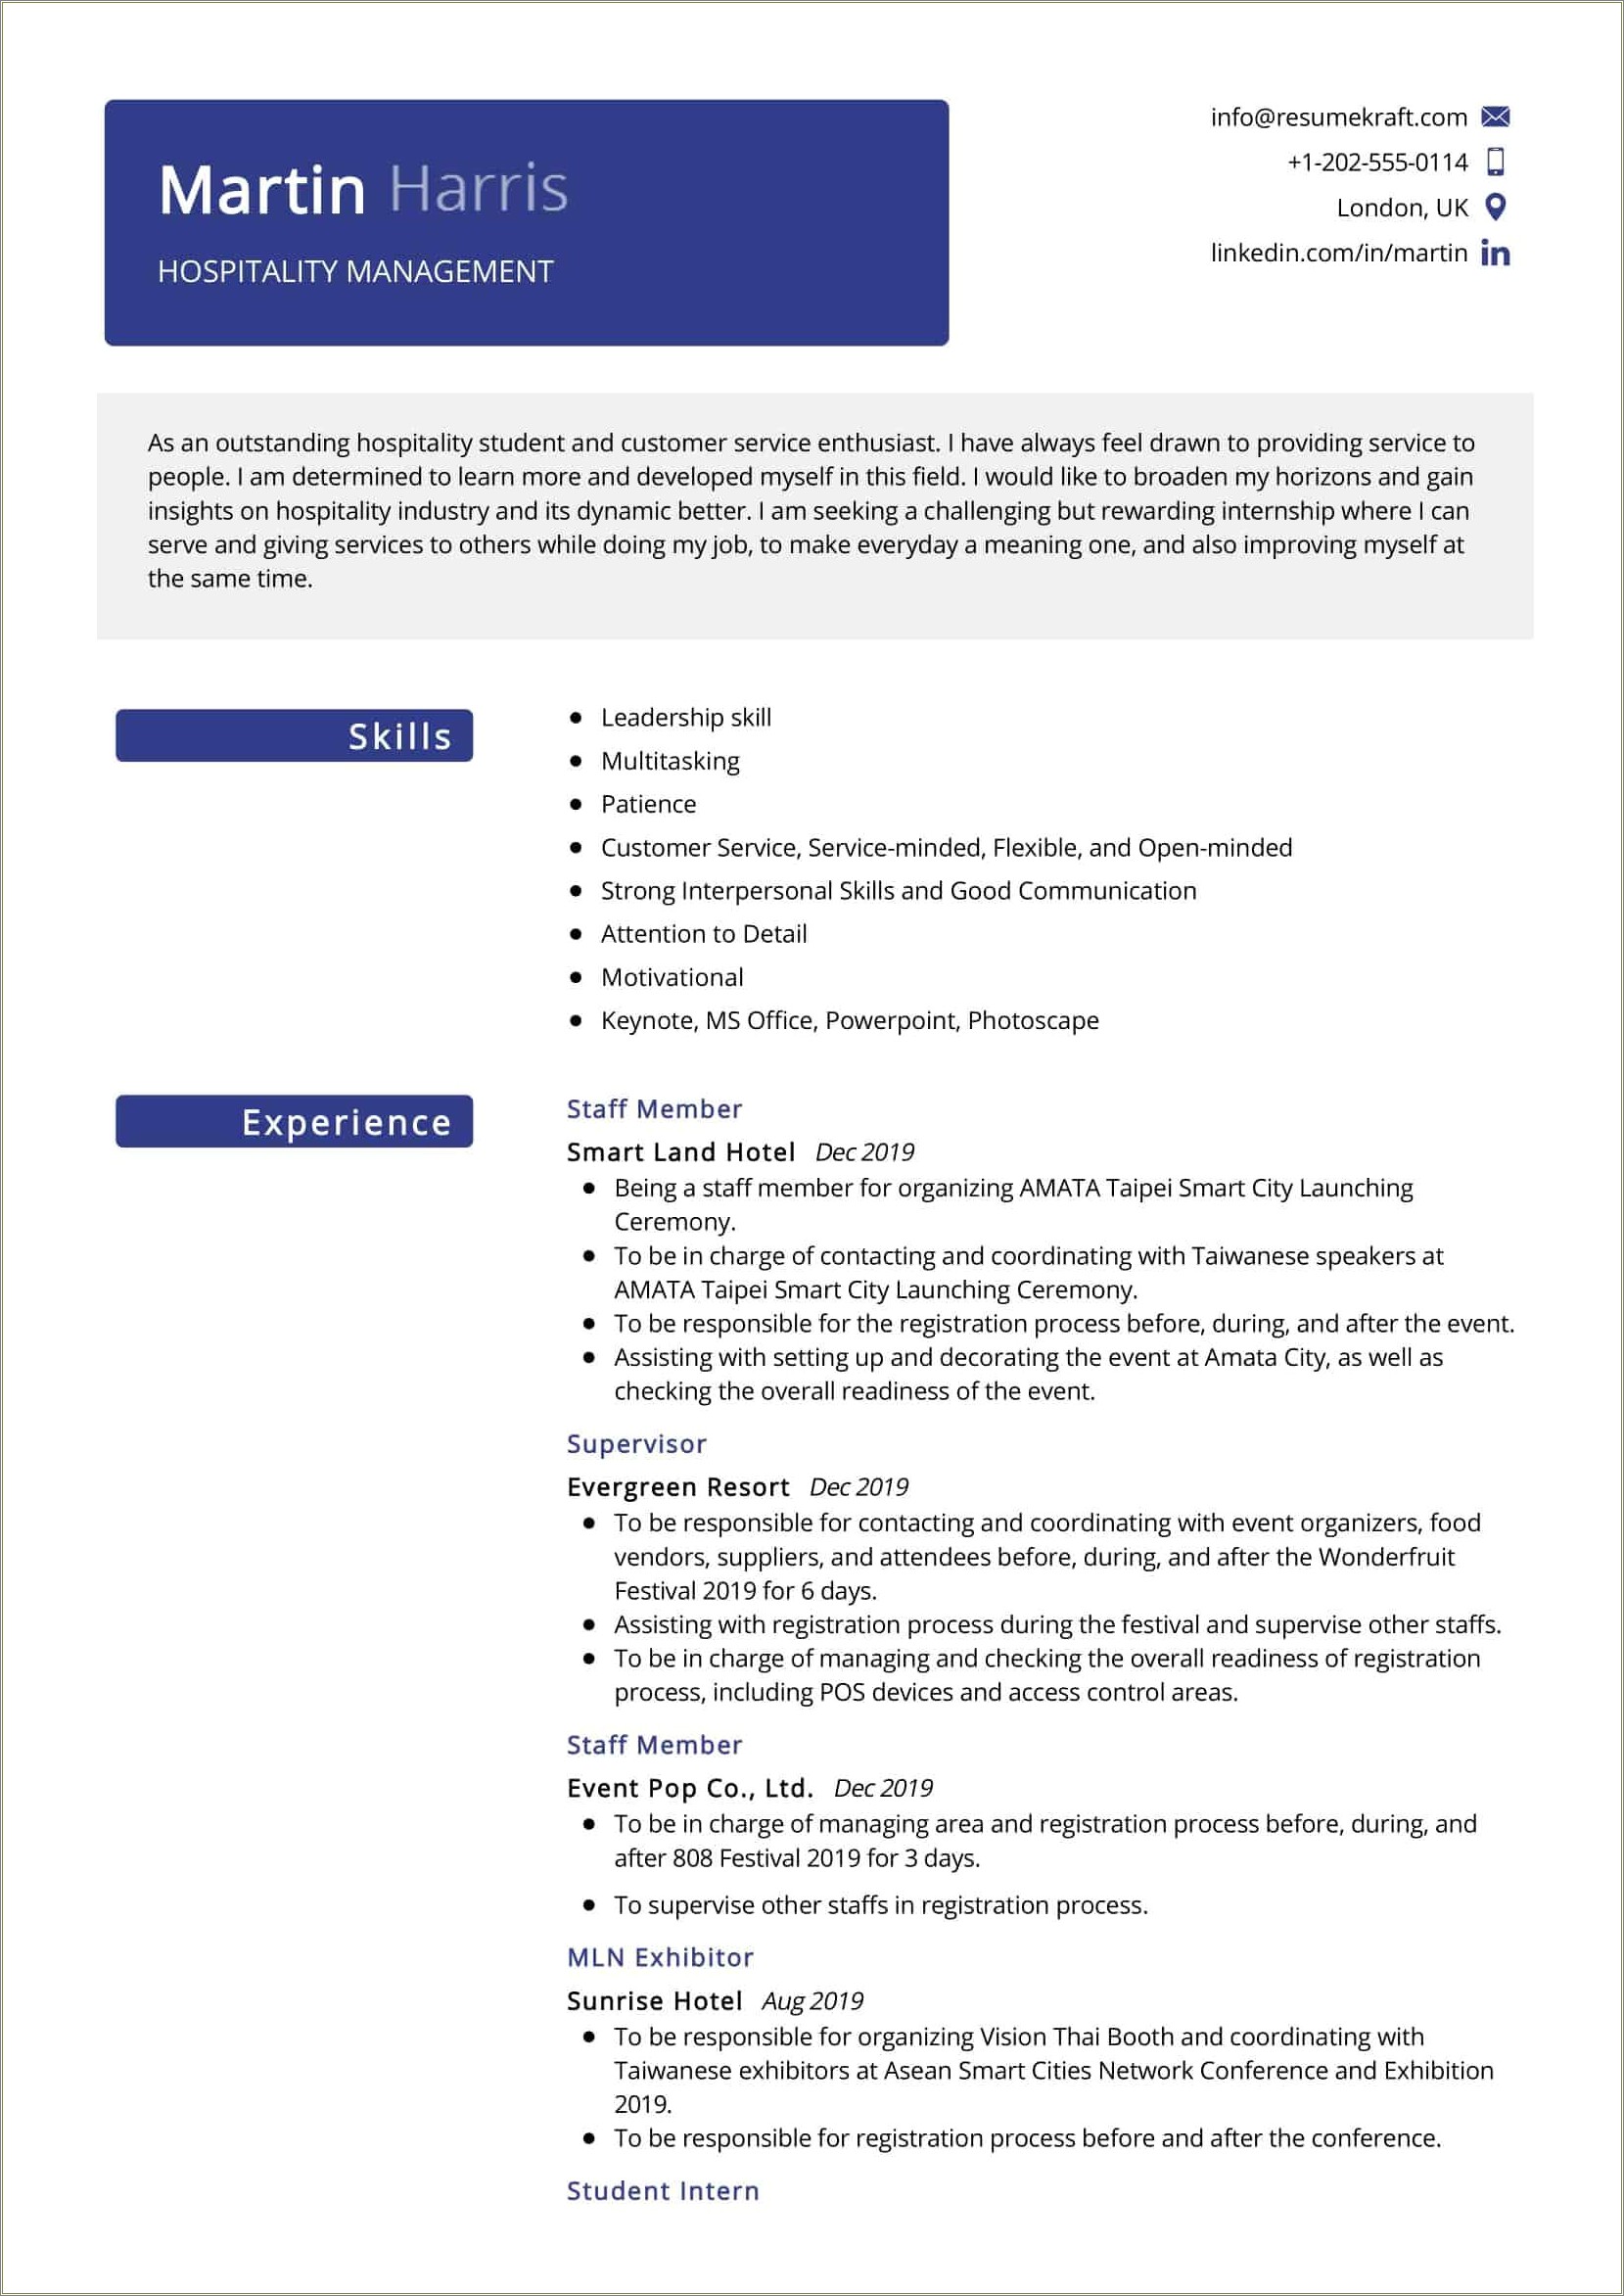 Resume Objective Examples For Restaurant Management